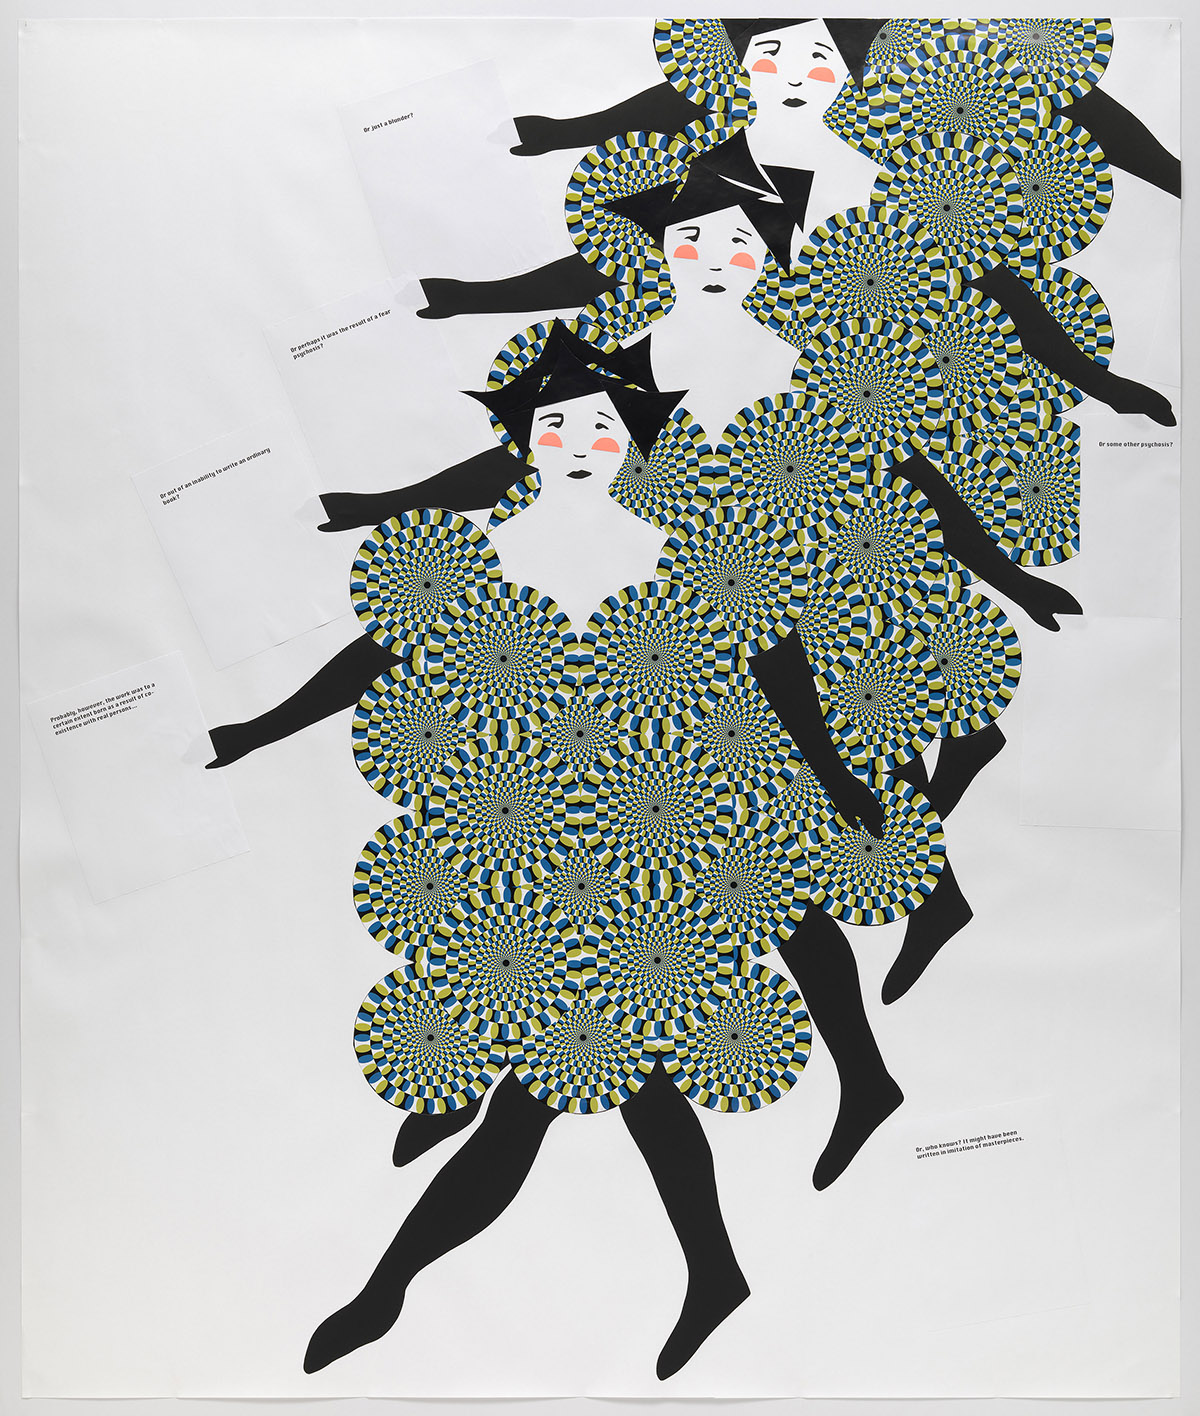 Chorus Line Frances Stark (American, born in 1967) 2008 Cut-and-pasted printed paper and cut-and-pasted colored paper on paper *The Museum of Modern Art, New York, NY, U.S.A. Purchased with funds provided by the Contemporary Arts Council of The Museum of Modern Art, and Committee on Drawings Funds. *Digital Image © The Museum of Modern Art/Licensed by SCALA / Art Resource, NY. *Courtesy Museum of Fine Arts, Boston